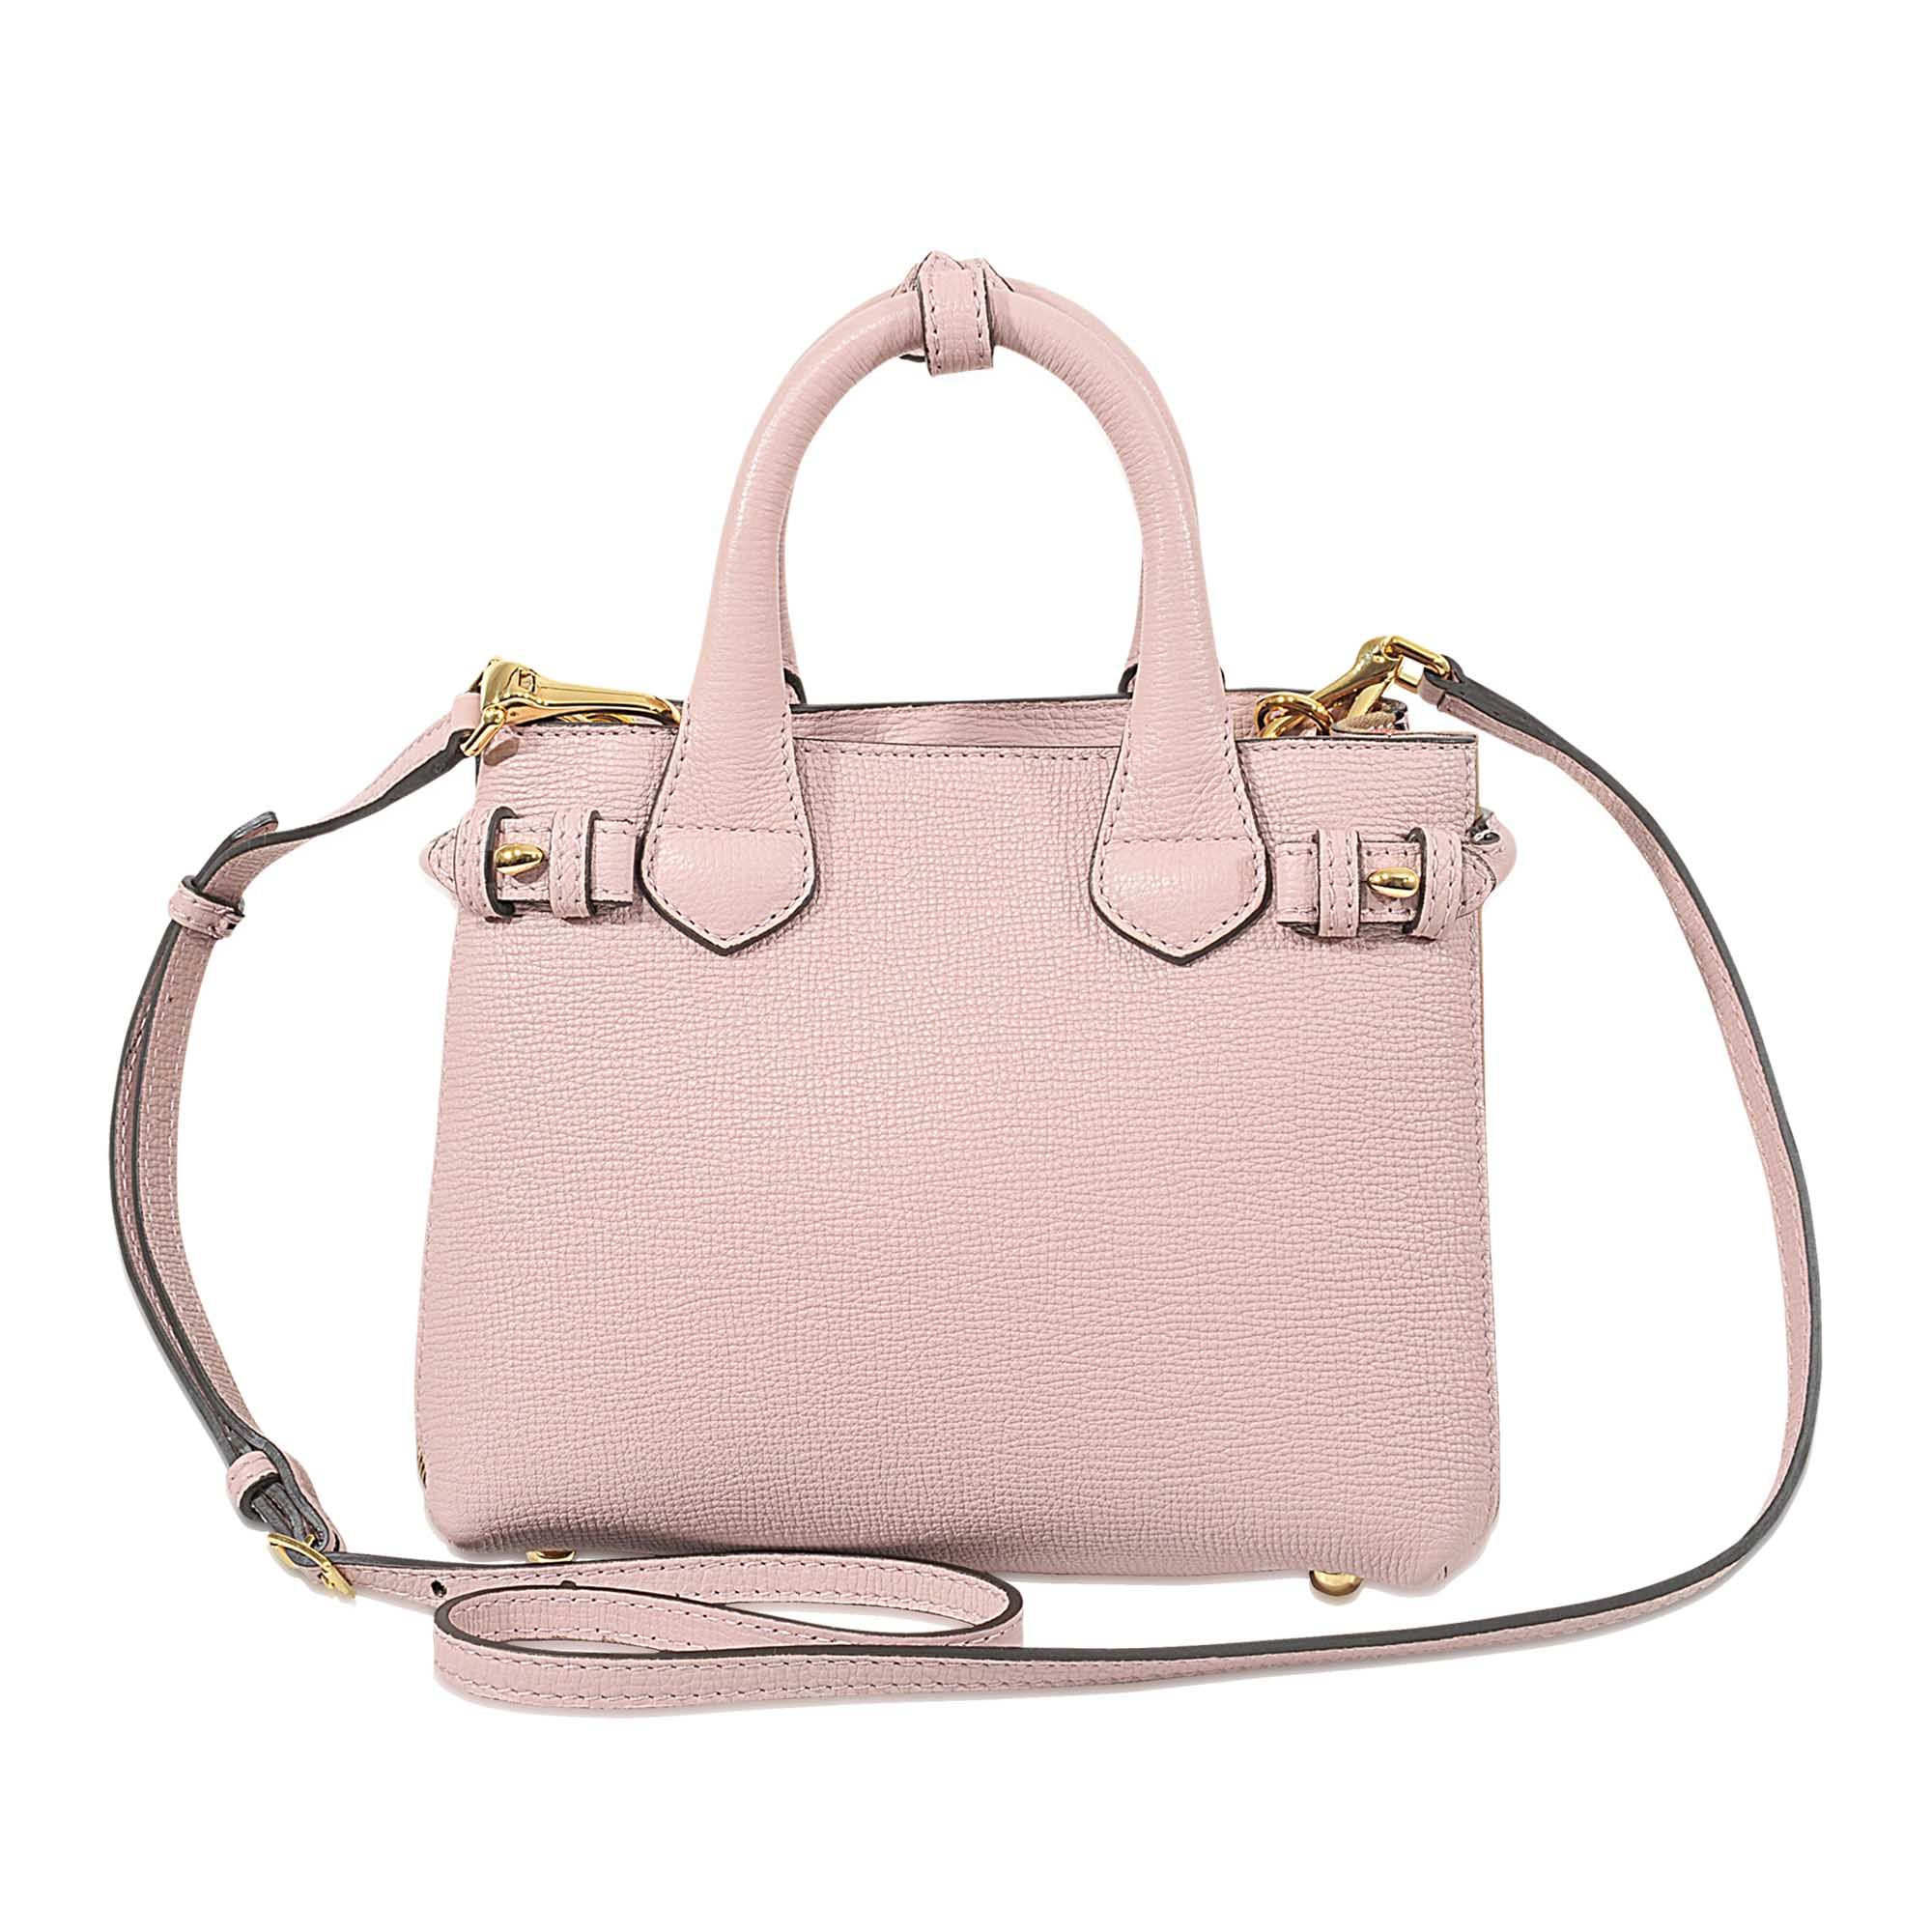 Lyst - Burberry Baby Banner Bag in Pink